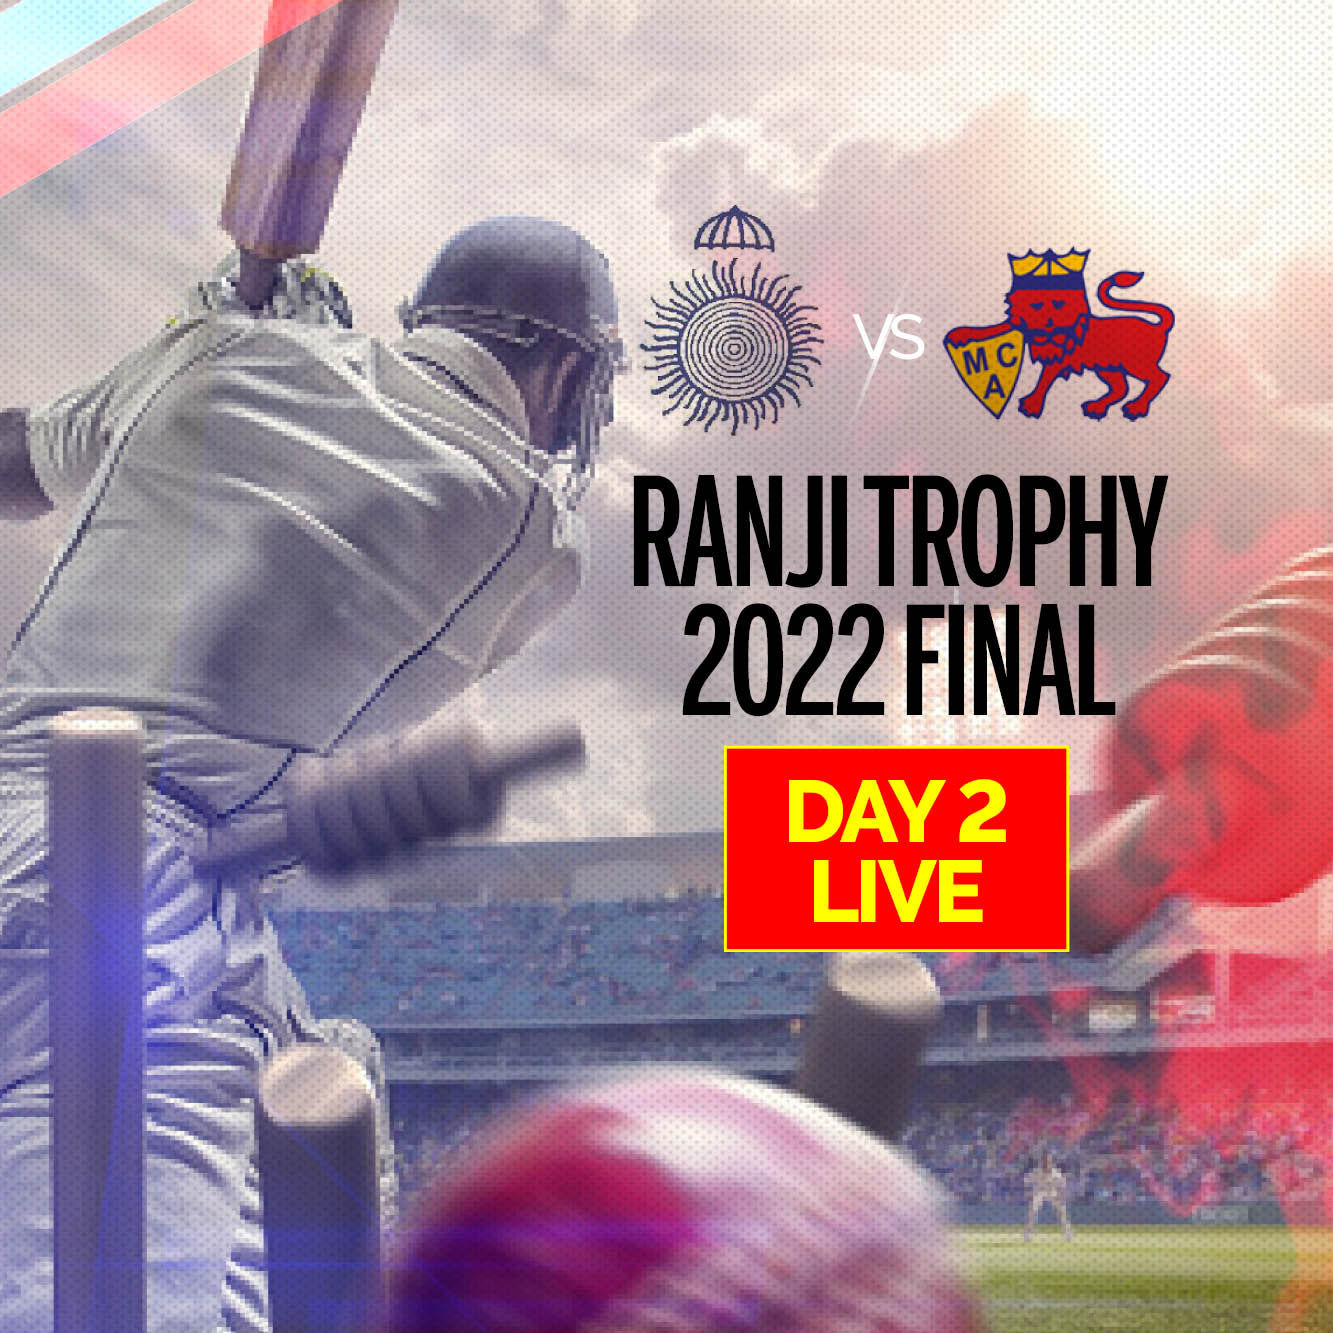 MP vs MUM, Ranji Trophy 2022 Final Day 2 Highlights MP Top Order Rises To The Challenge On Day 2